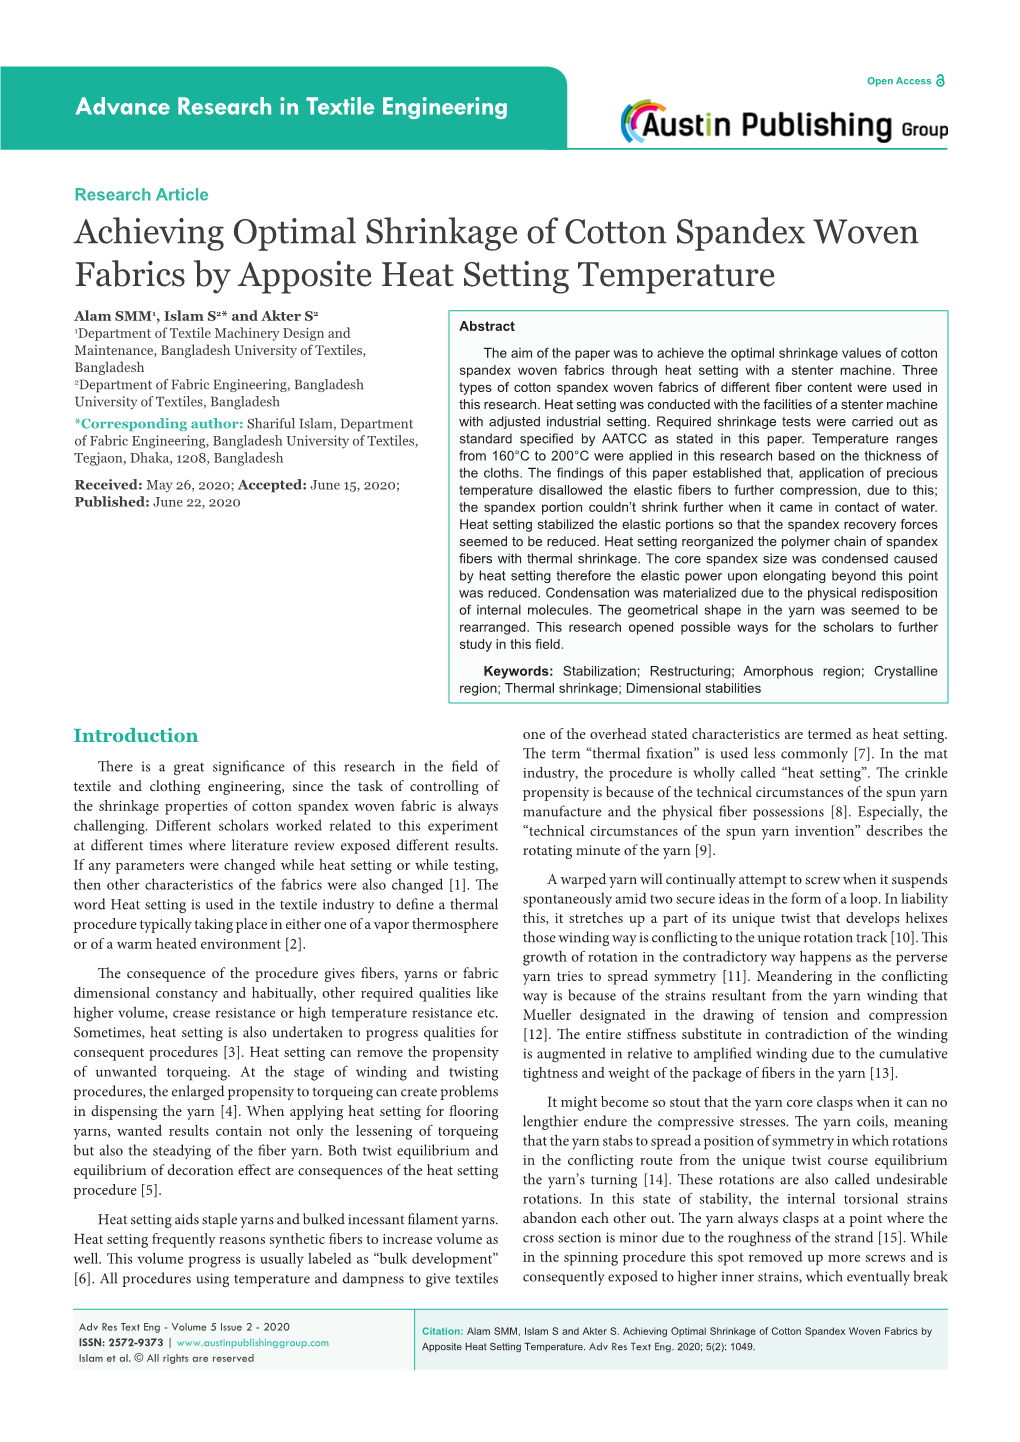 Achieving Optimal Shrinkage of Cotton Spandex Woven Fabrics by Apposite Heat Setting Temperature